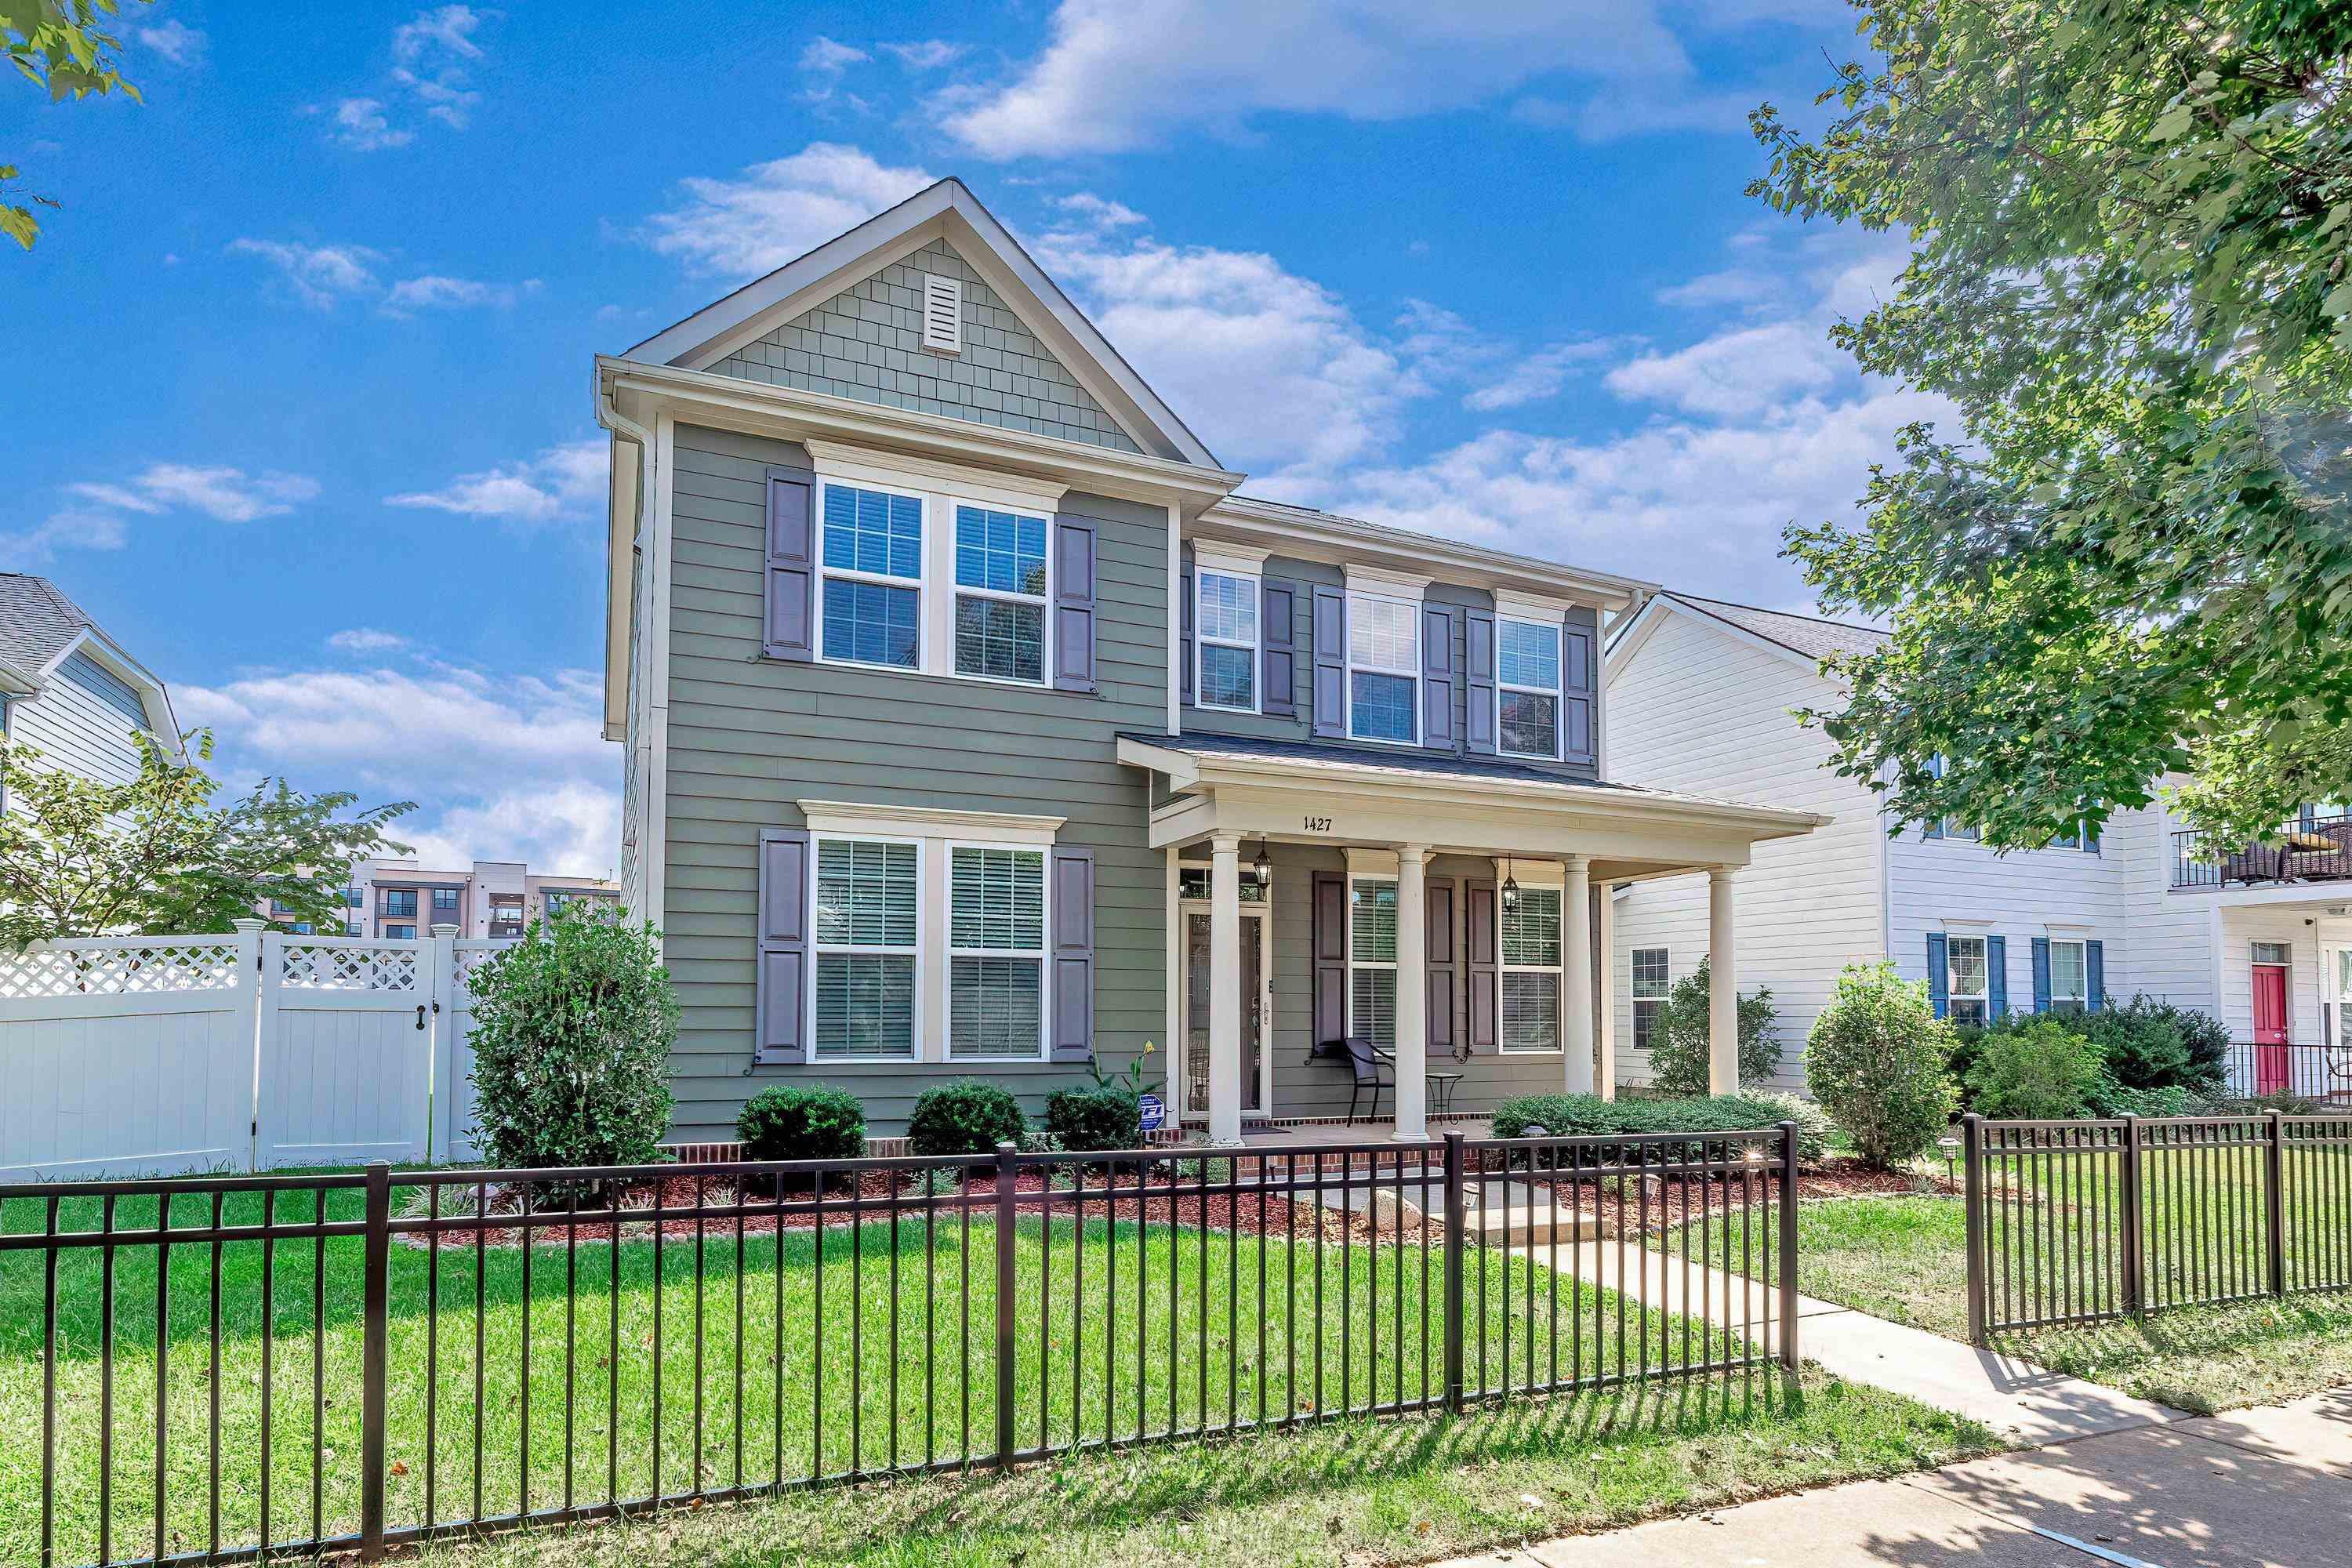 Photo one of 1427 Palace Garden Way Raleigh NC 27603 | MLS 2532673